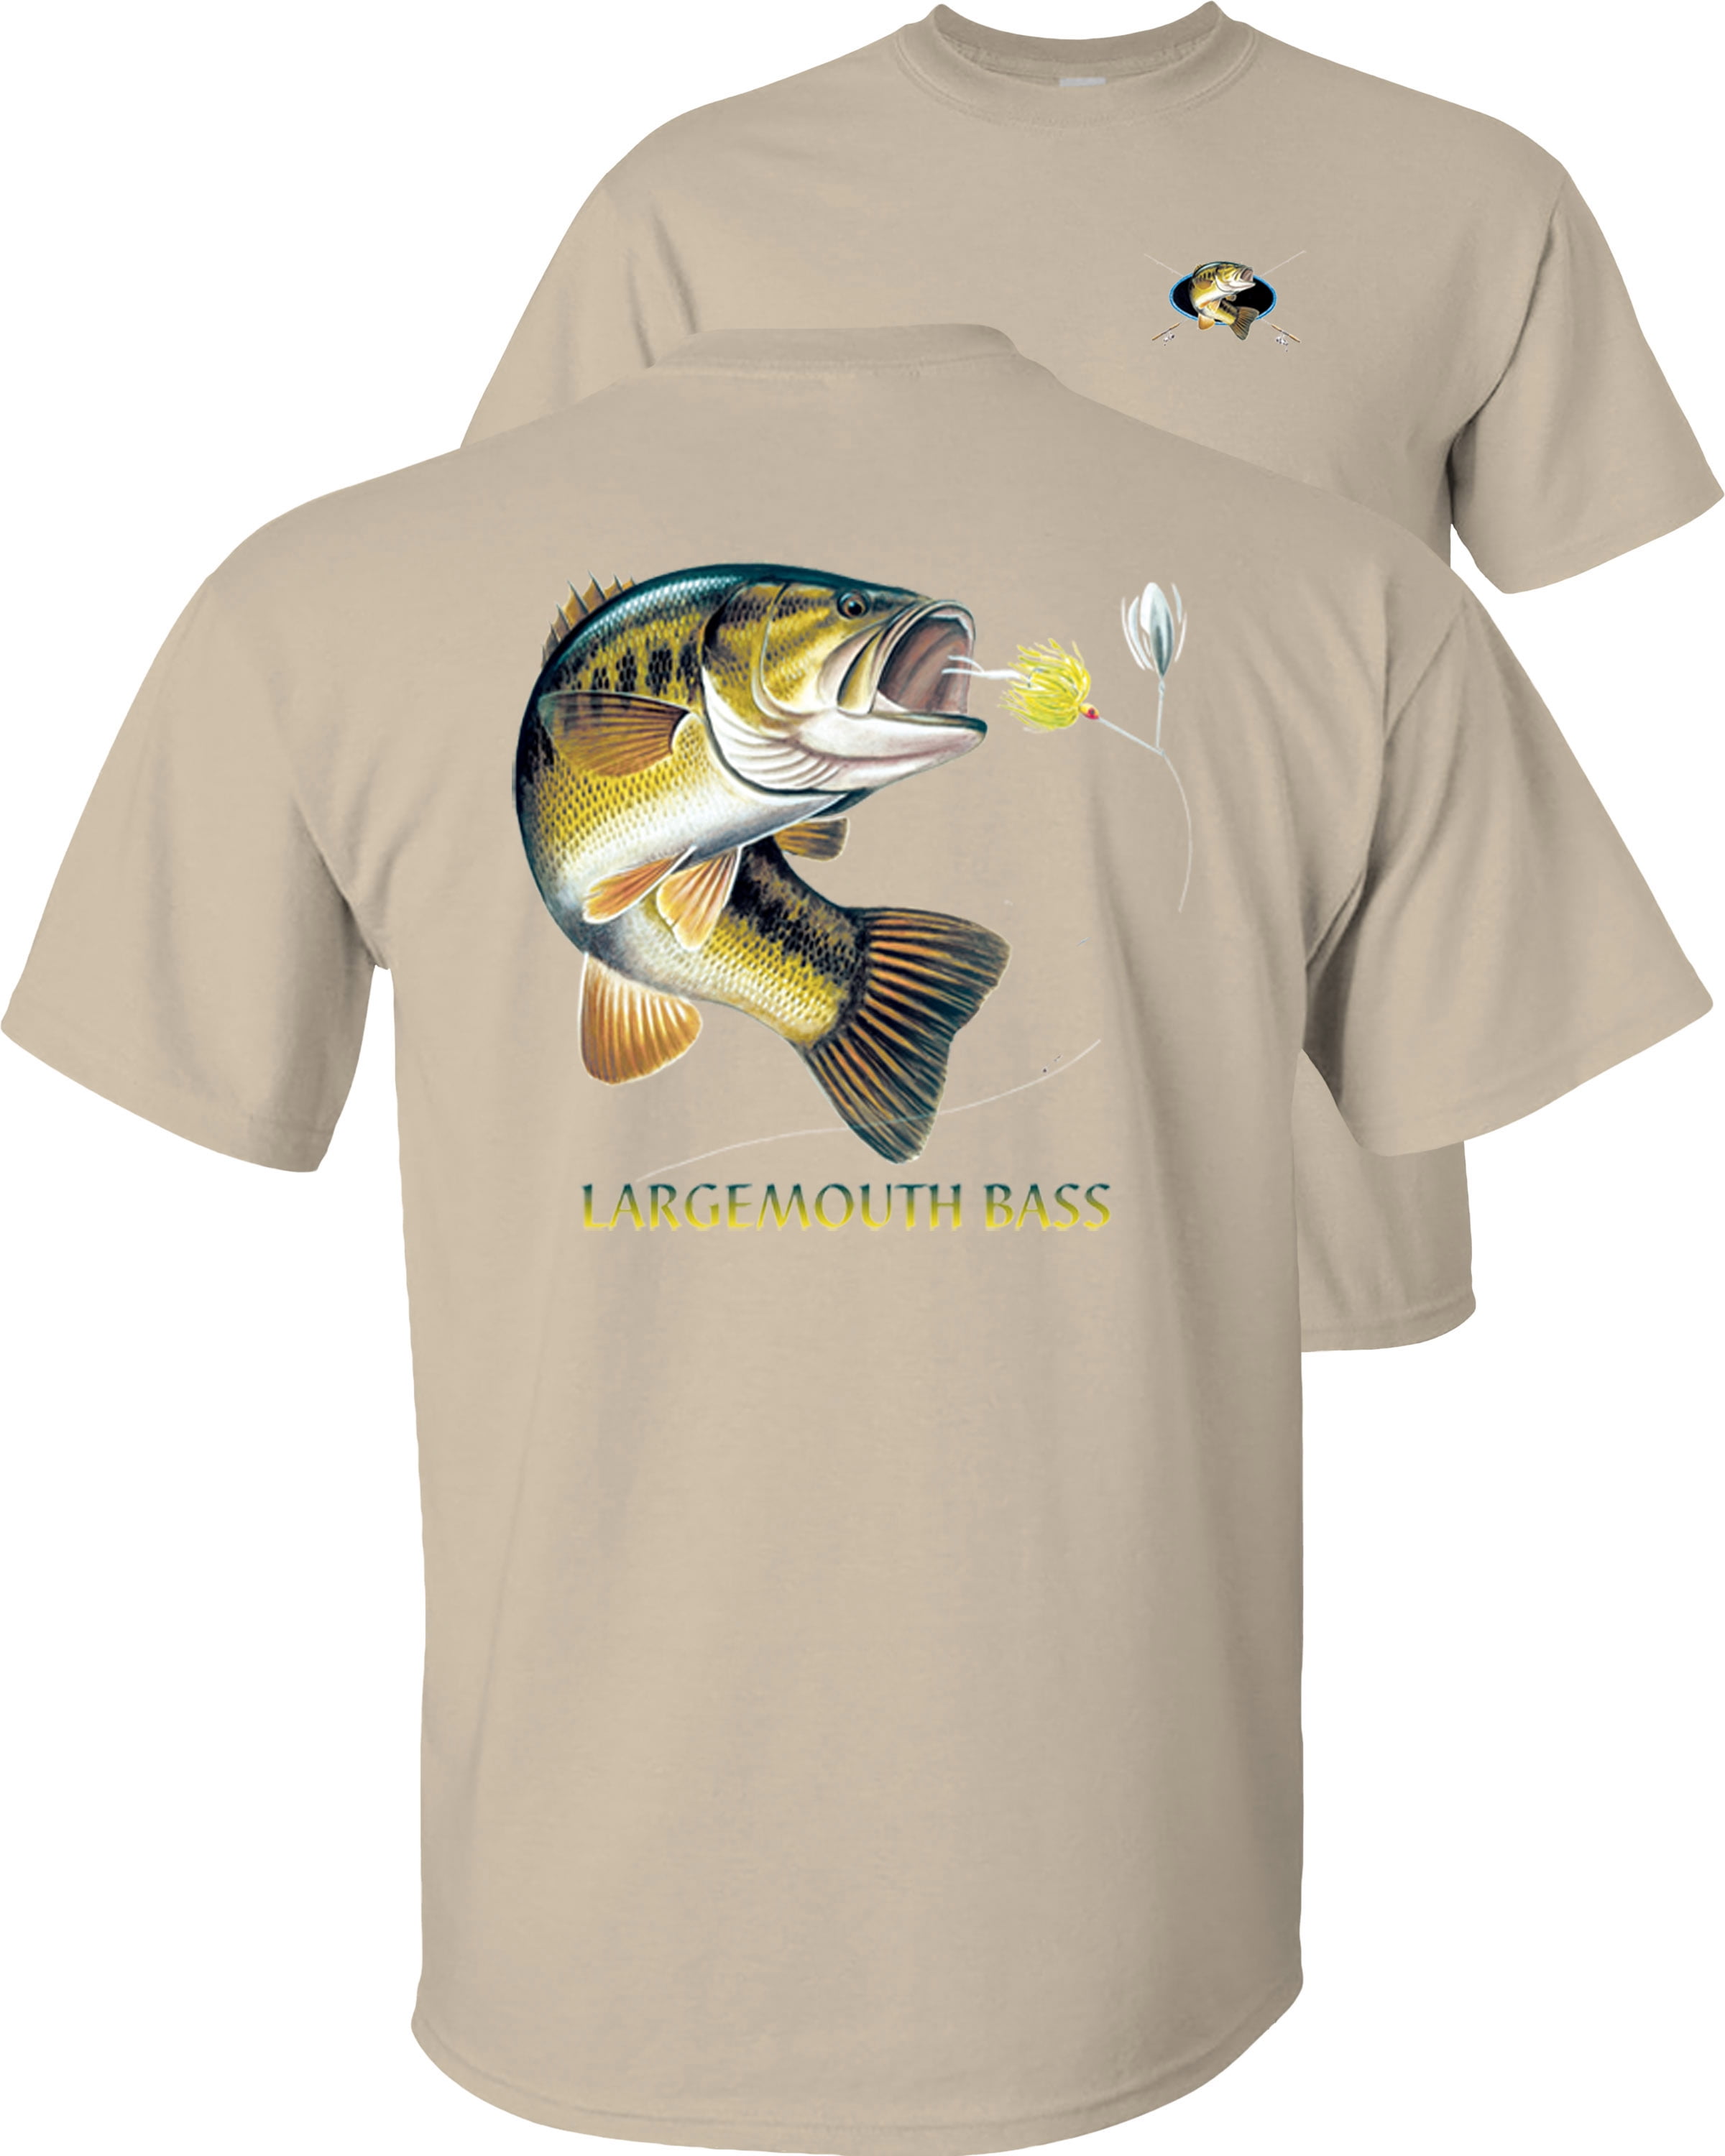 Fair Game Largemouth Bass Fish T-Shirt Combination Profile Bass Fishing Angler Fisherman-Sand-L, adult Unisex, Size: adult Large, Brown